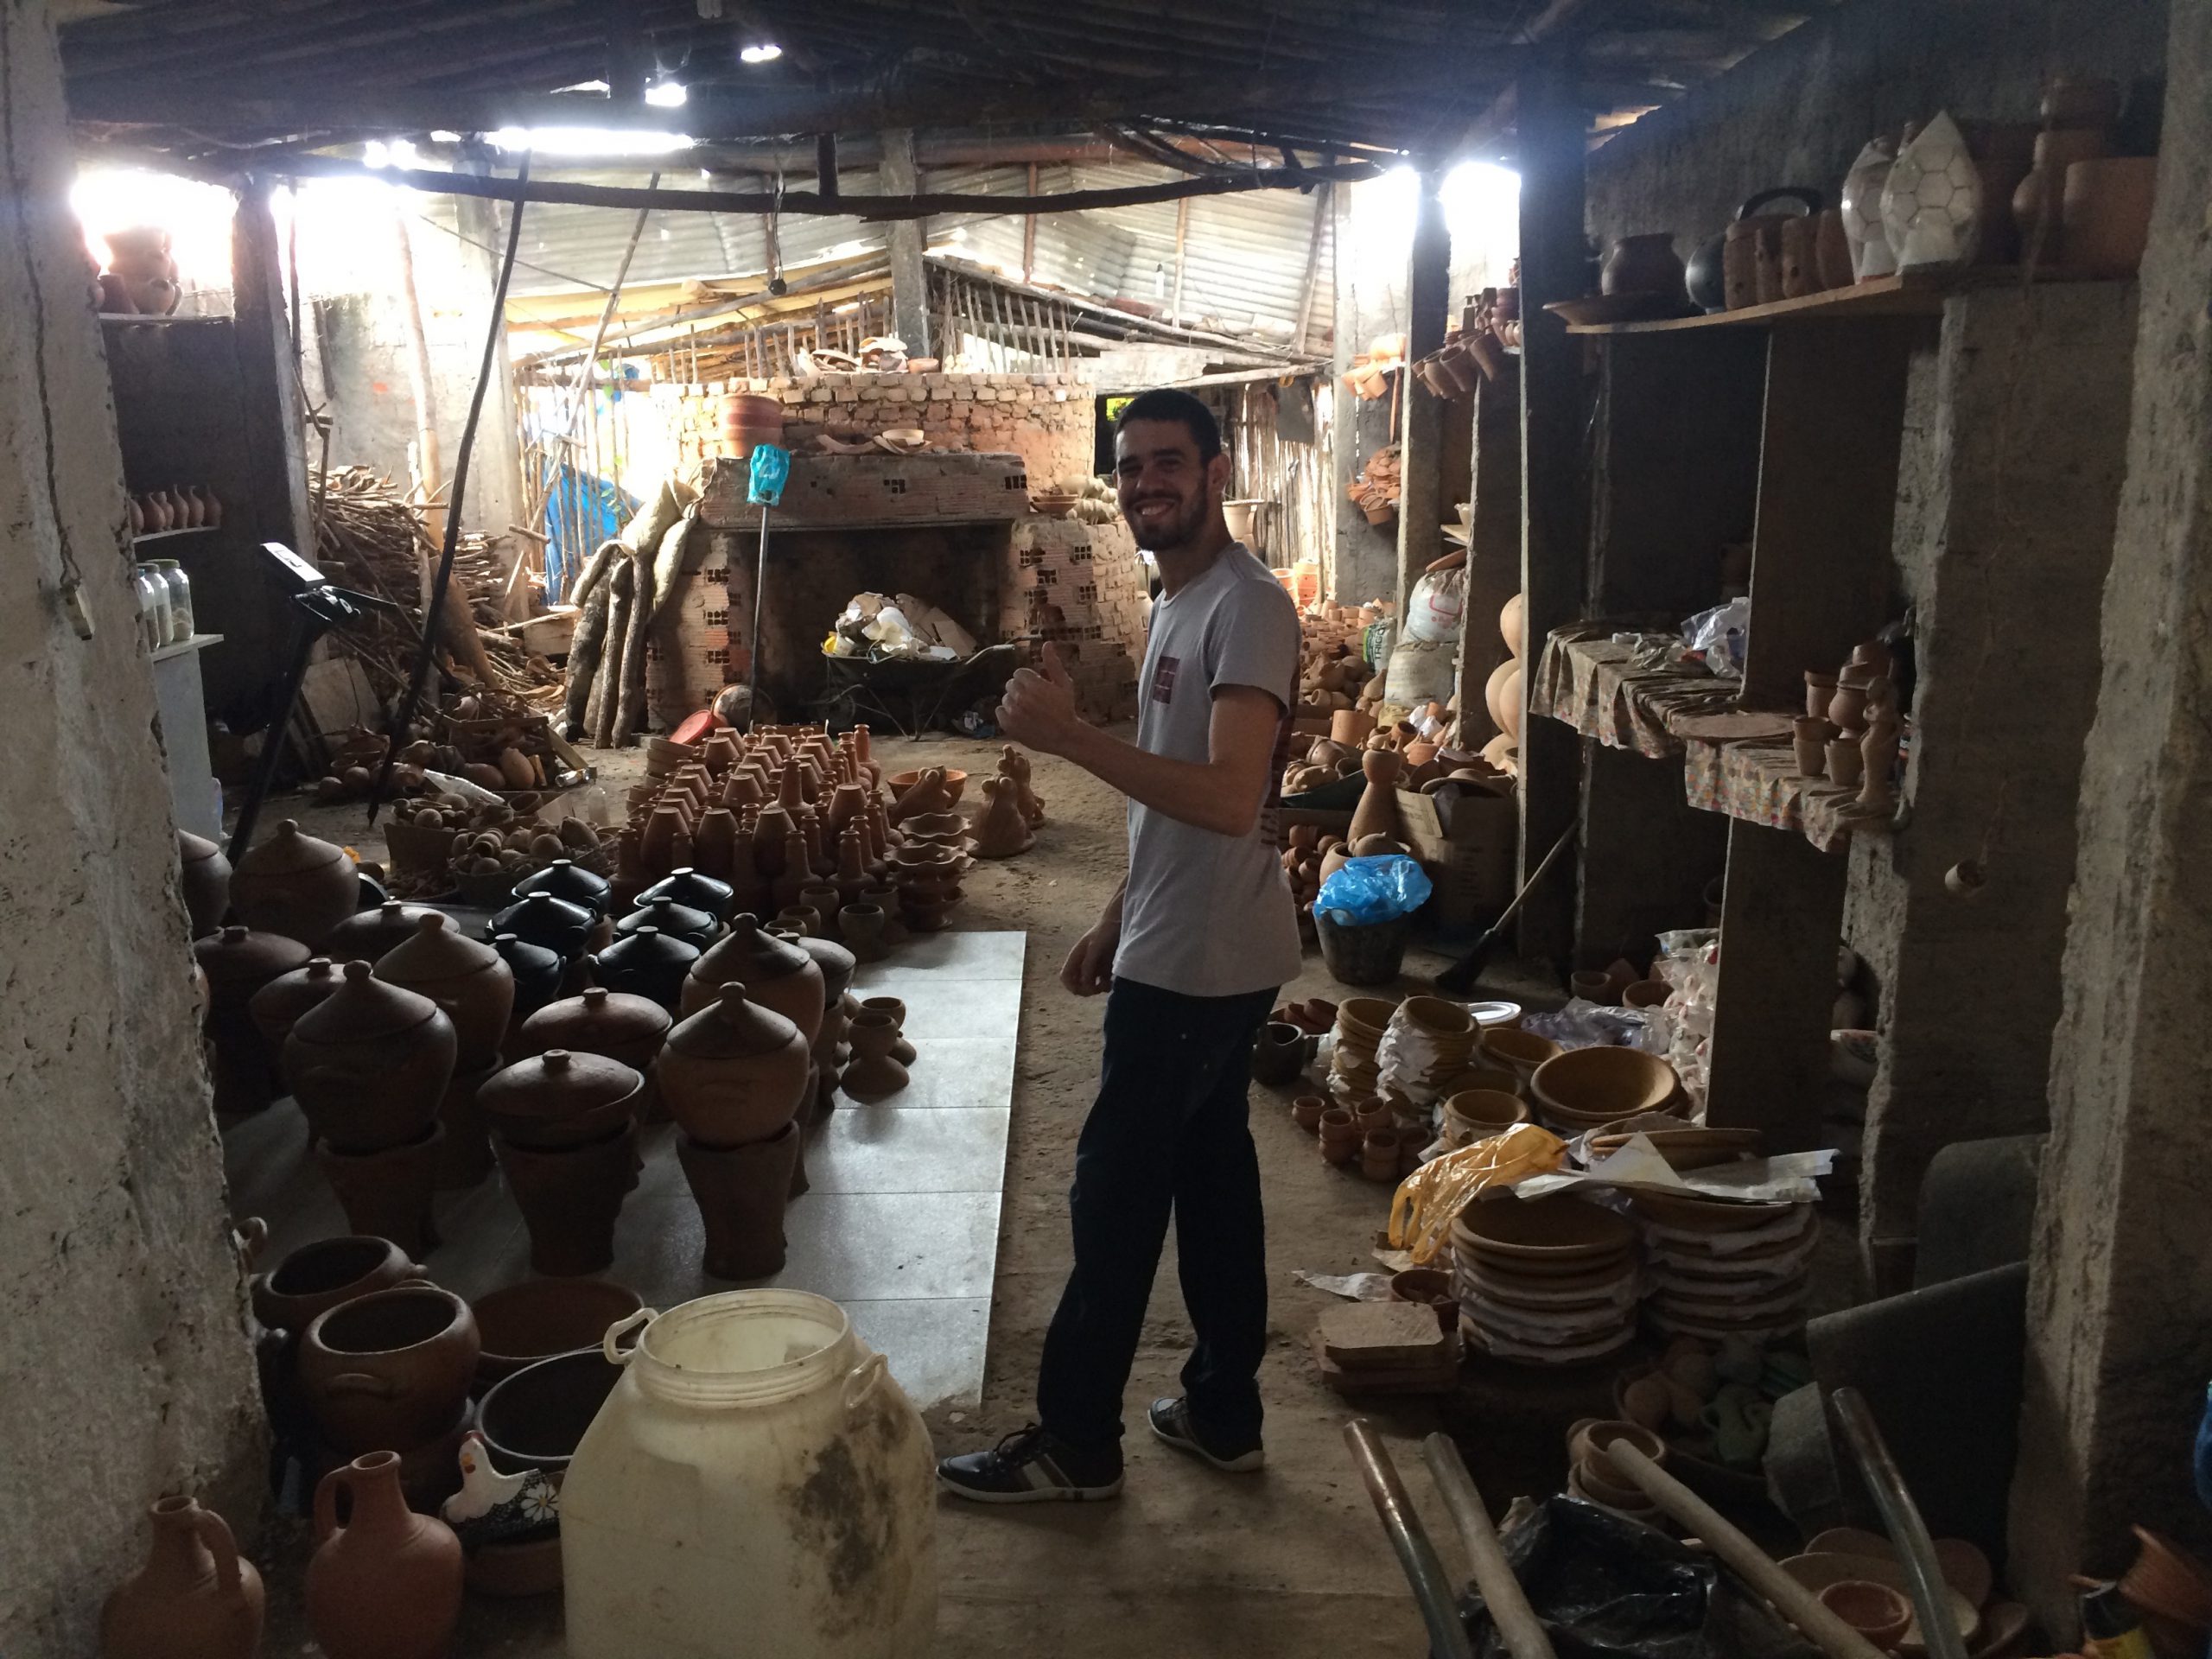 Local scholar Matheus Bandeira joined Pure Earth to help clean up contaminated workshops and educate potters.